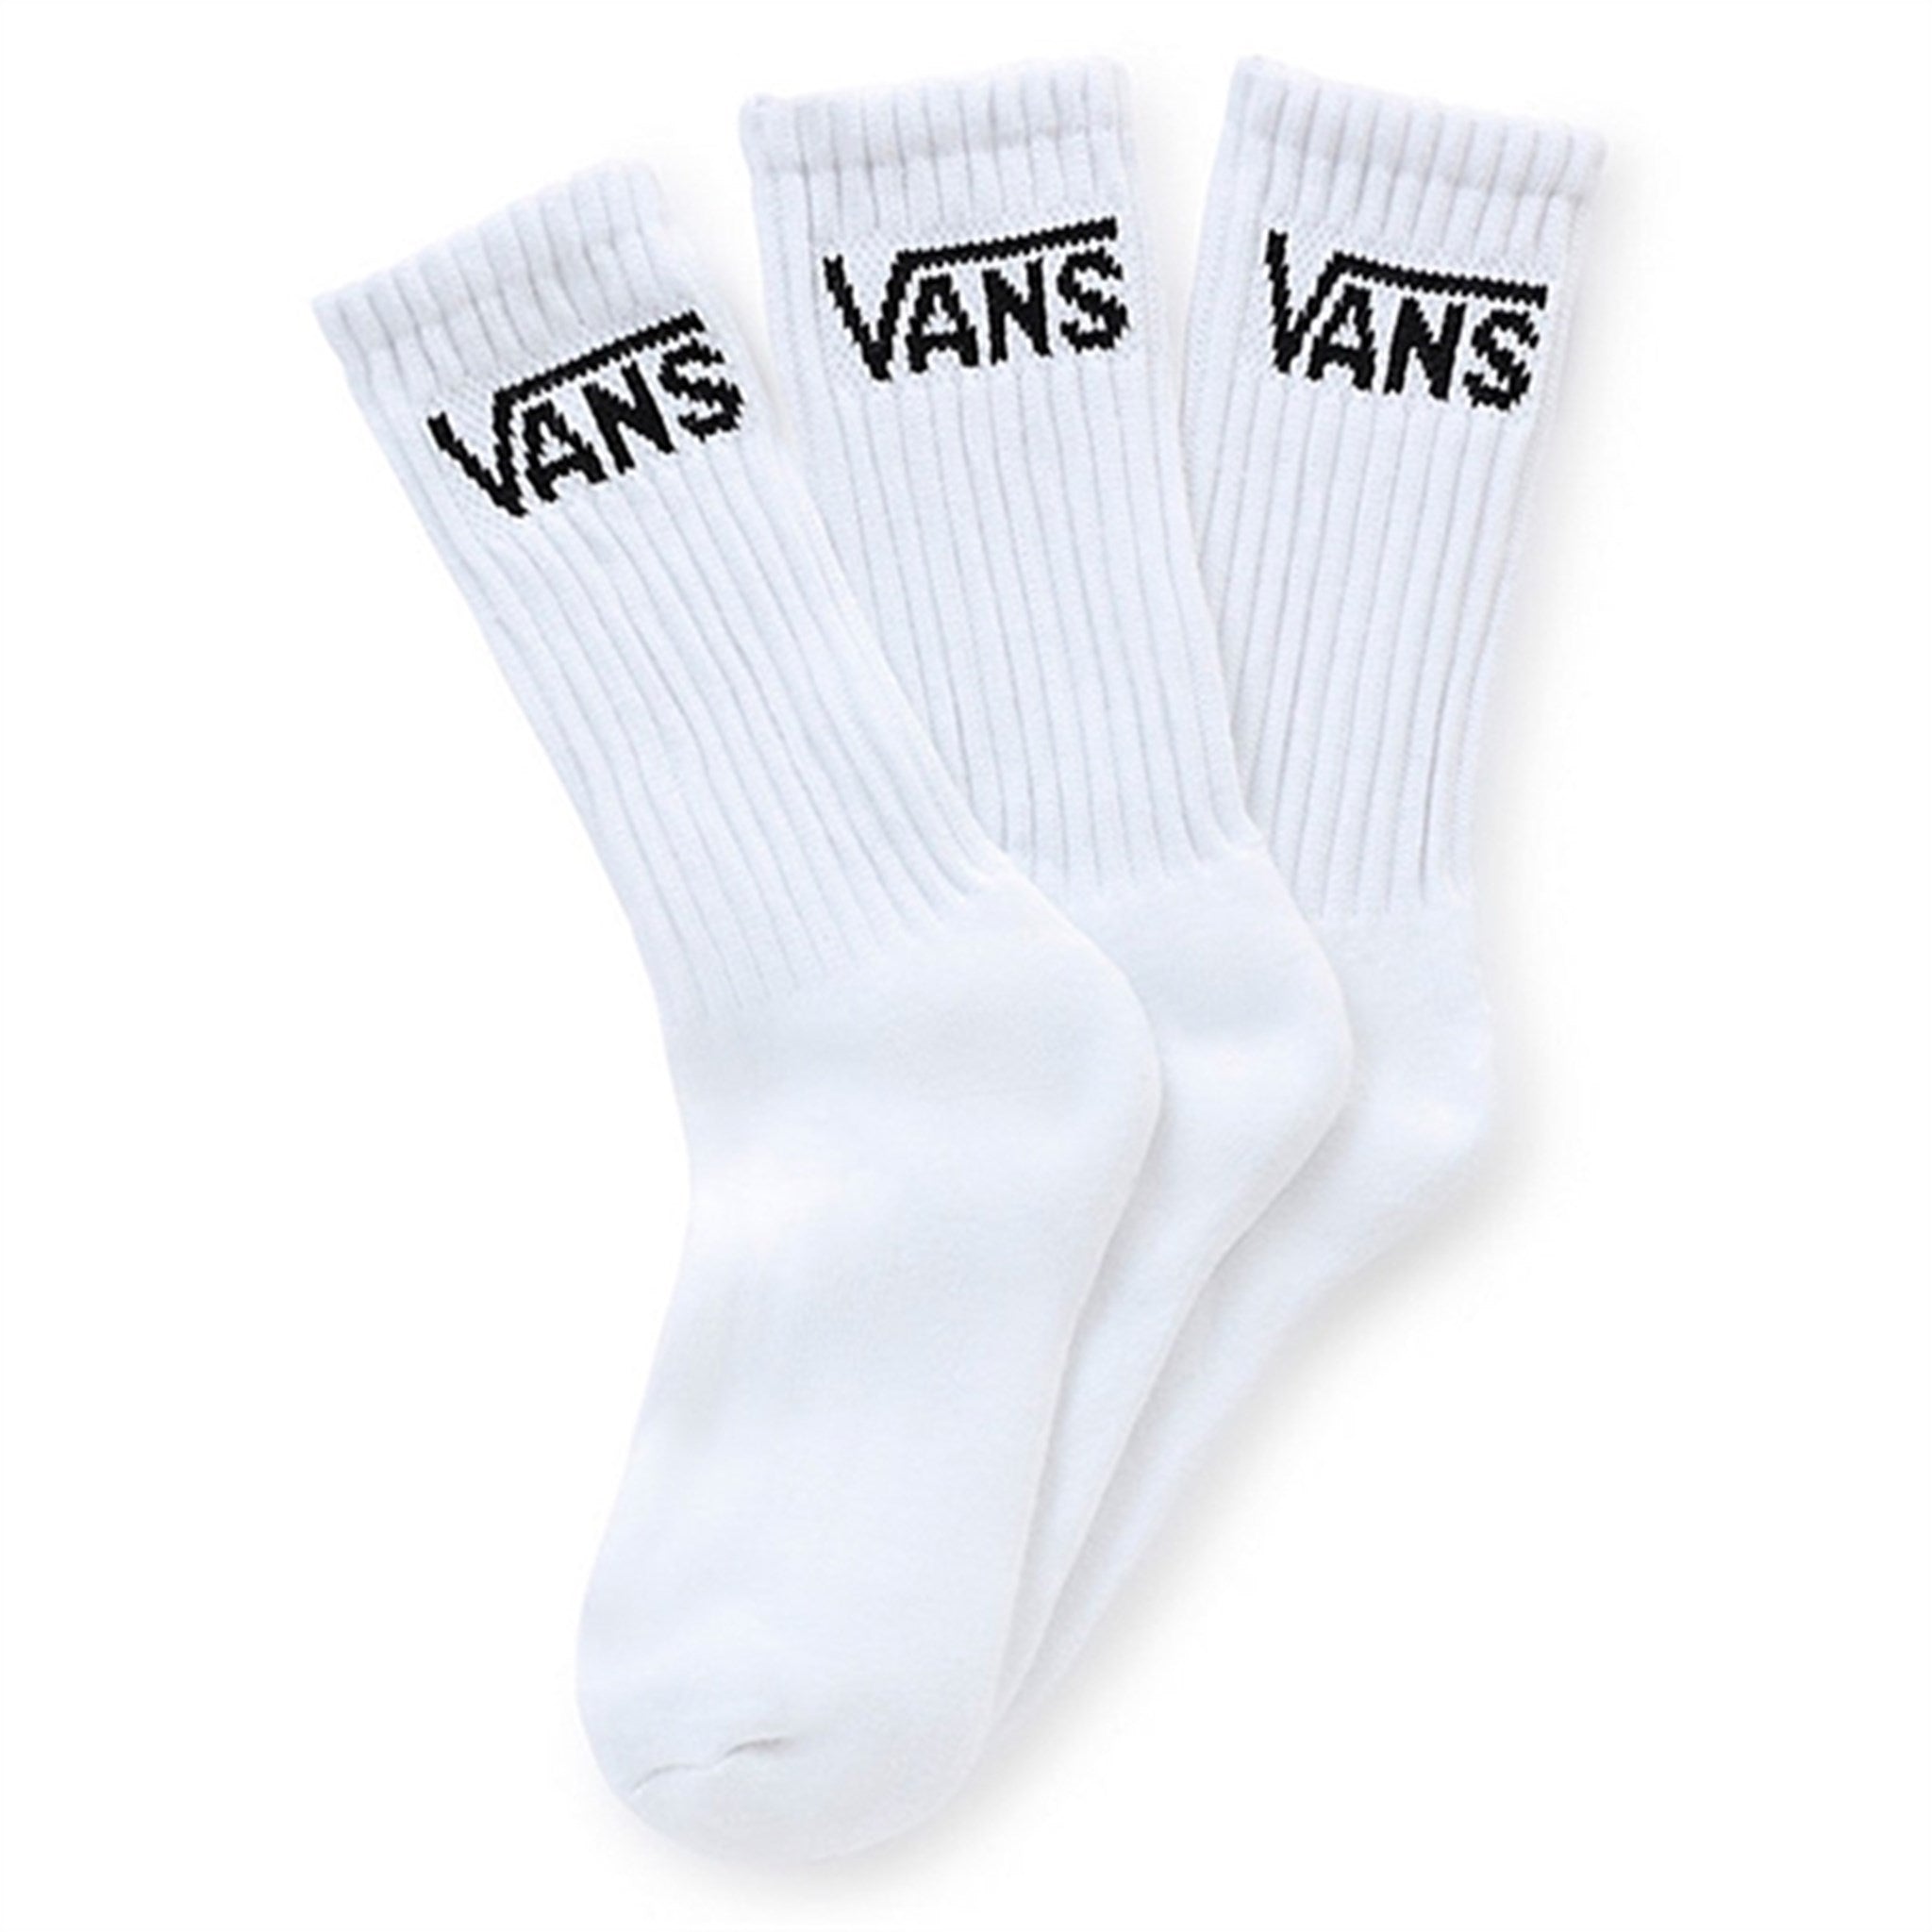 VANS By Classic Crew Youth Socks 3-Pack White